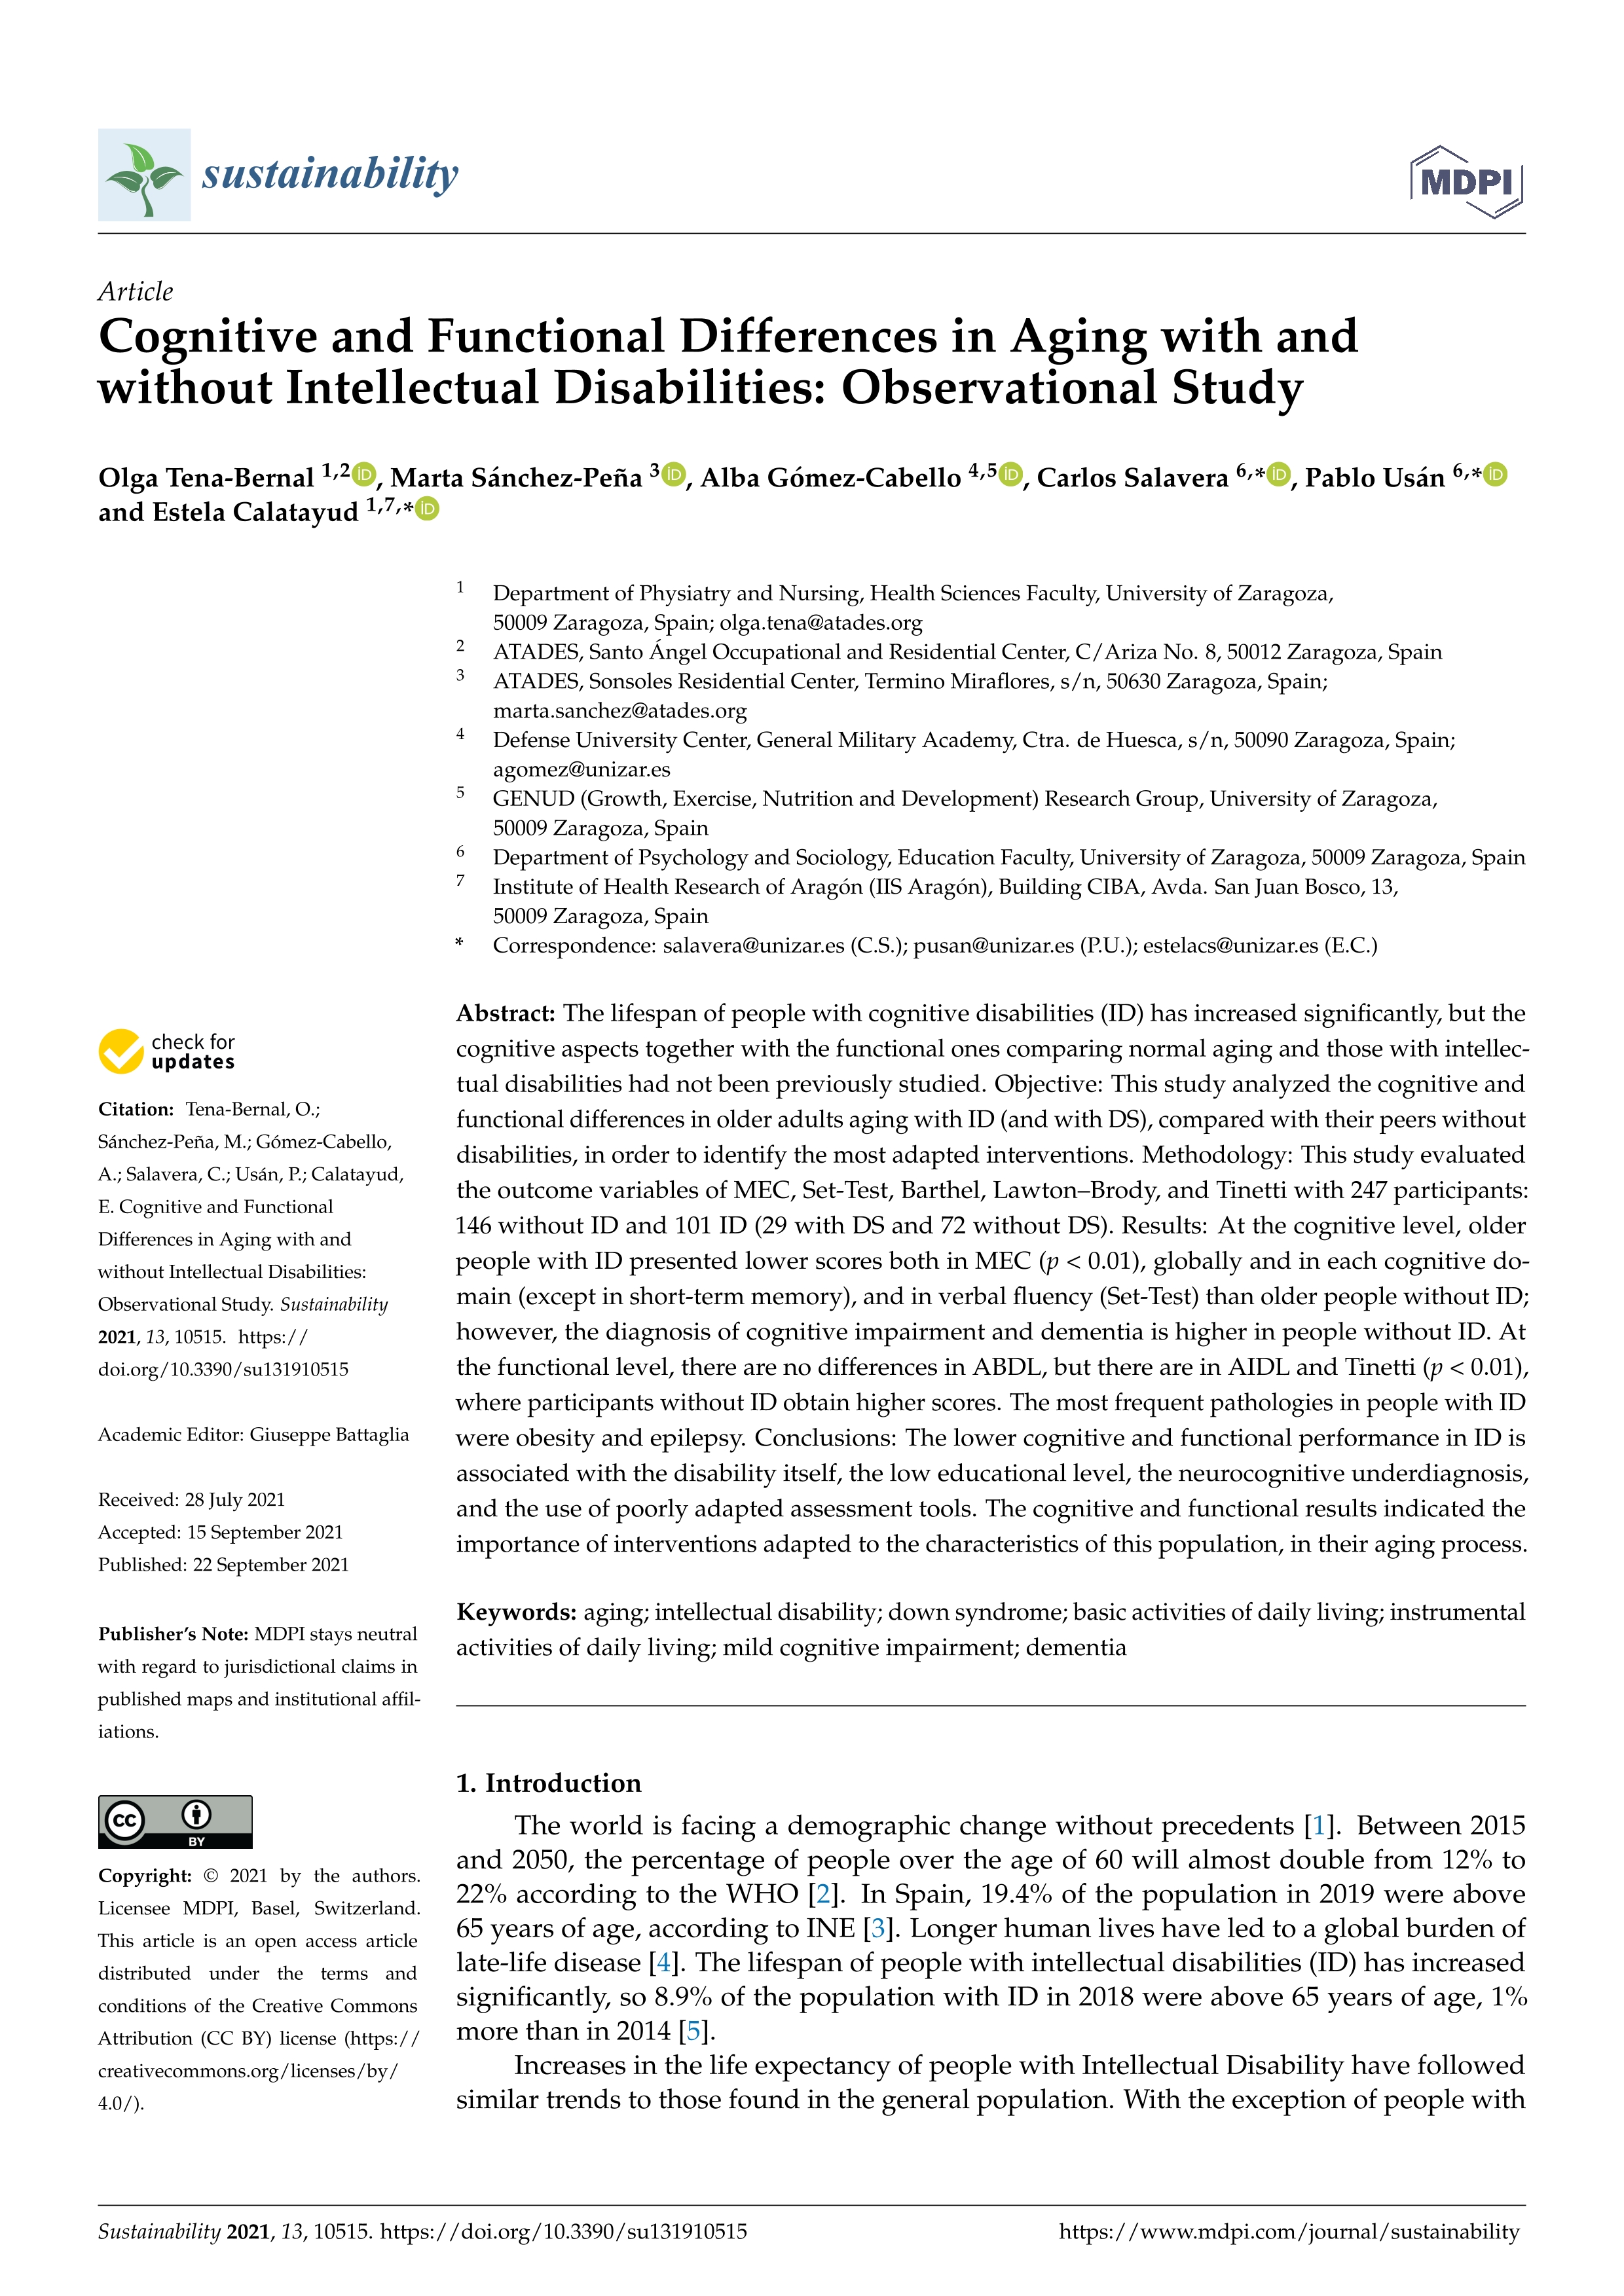 Cognitive and functional differences in aging with and without intellectual disabilities: Observational study